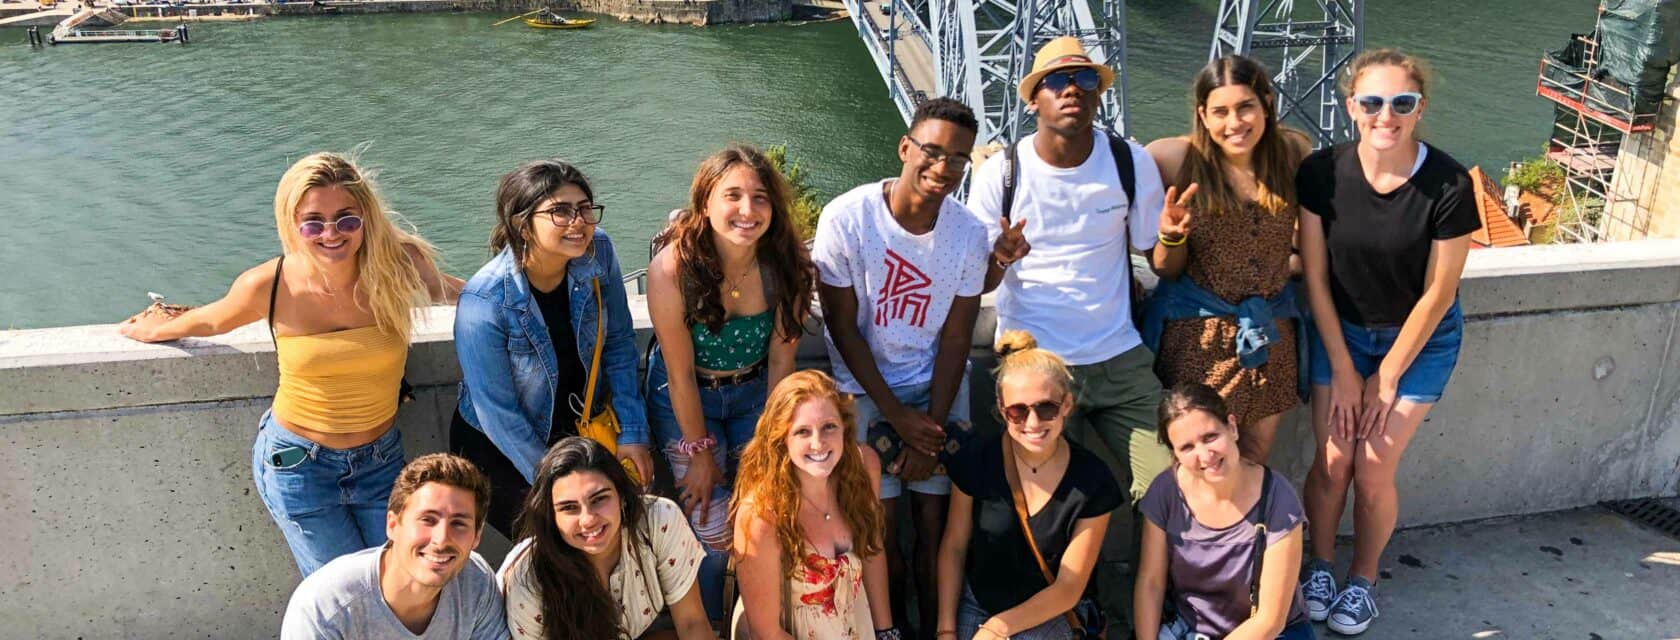 Students by a bridge while exploring the city.